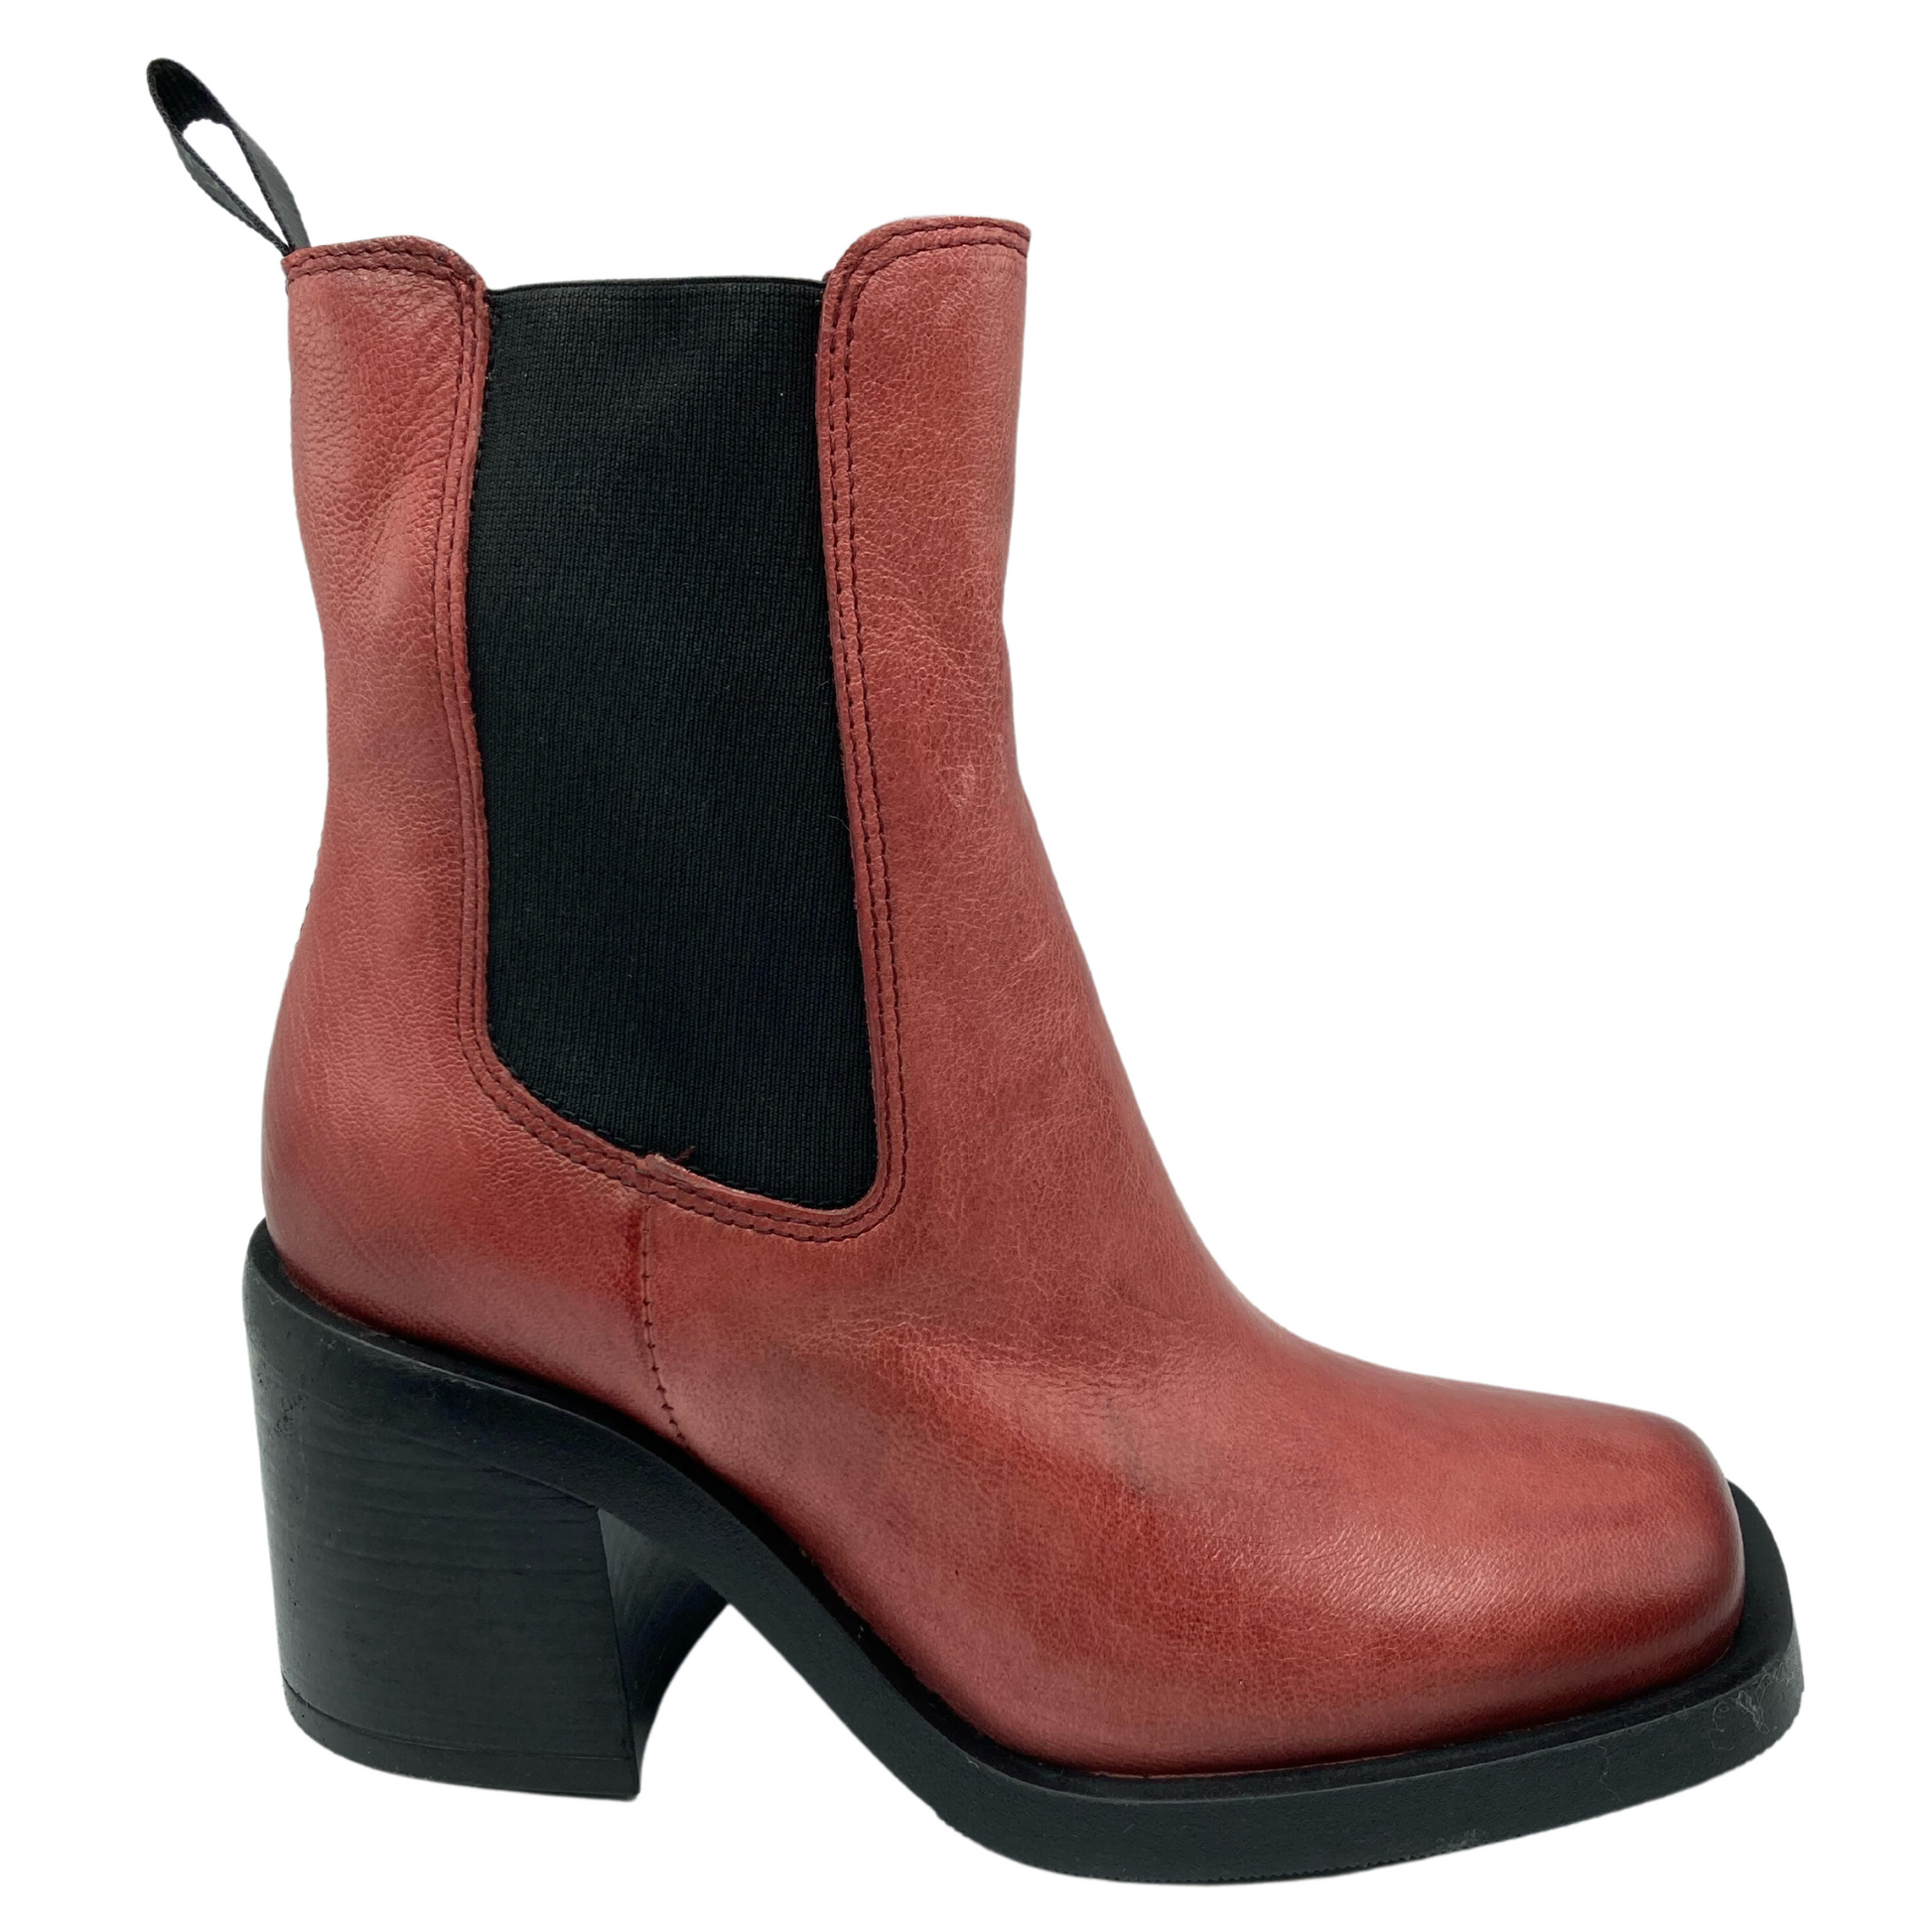 Profile view of mid-calf height red-orange chunky heeled boot